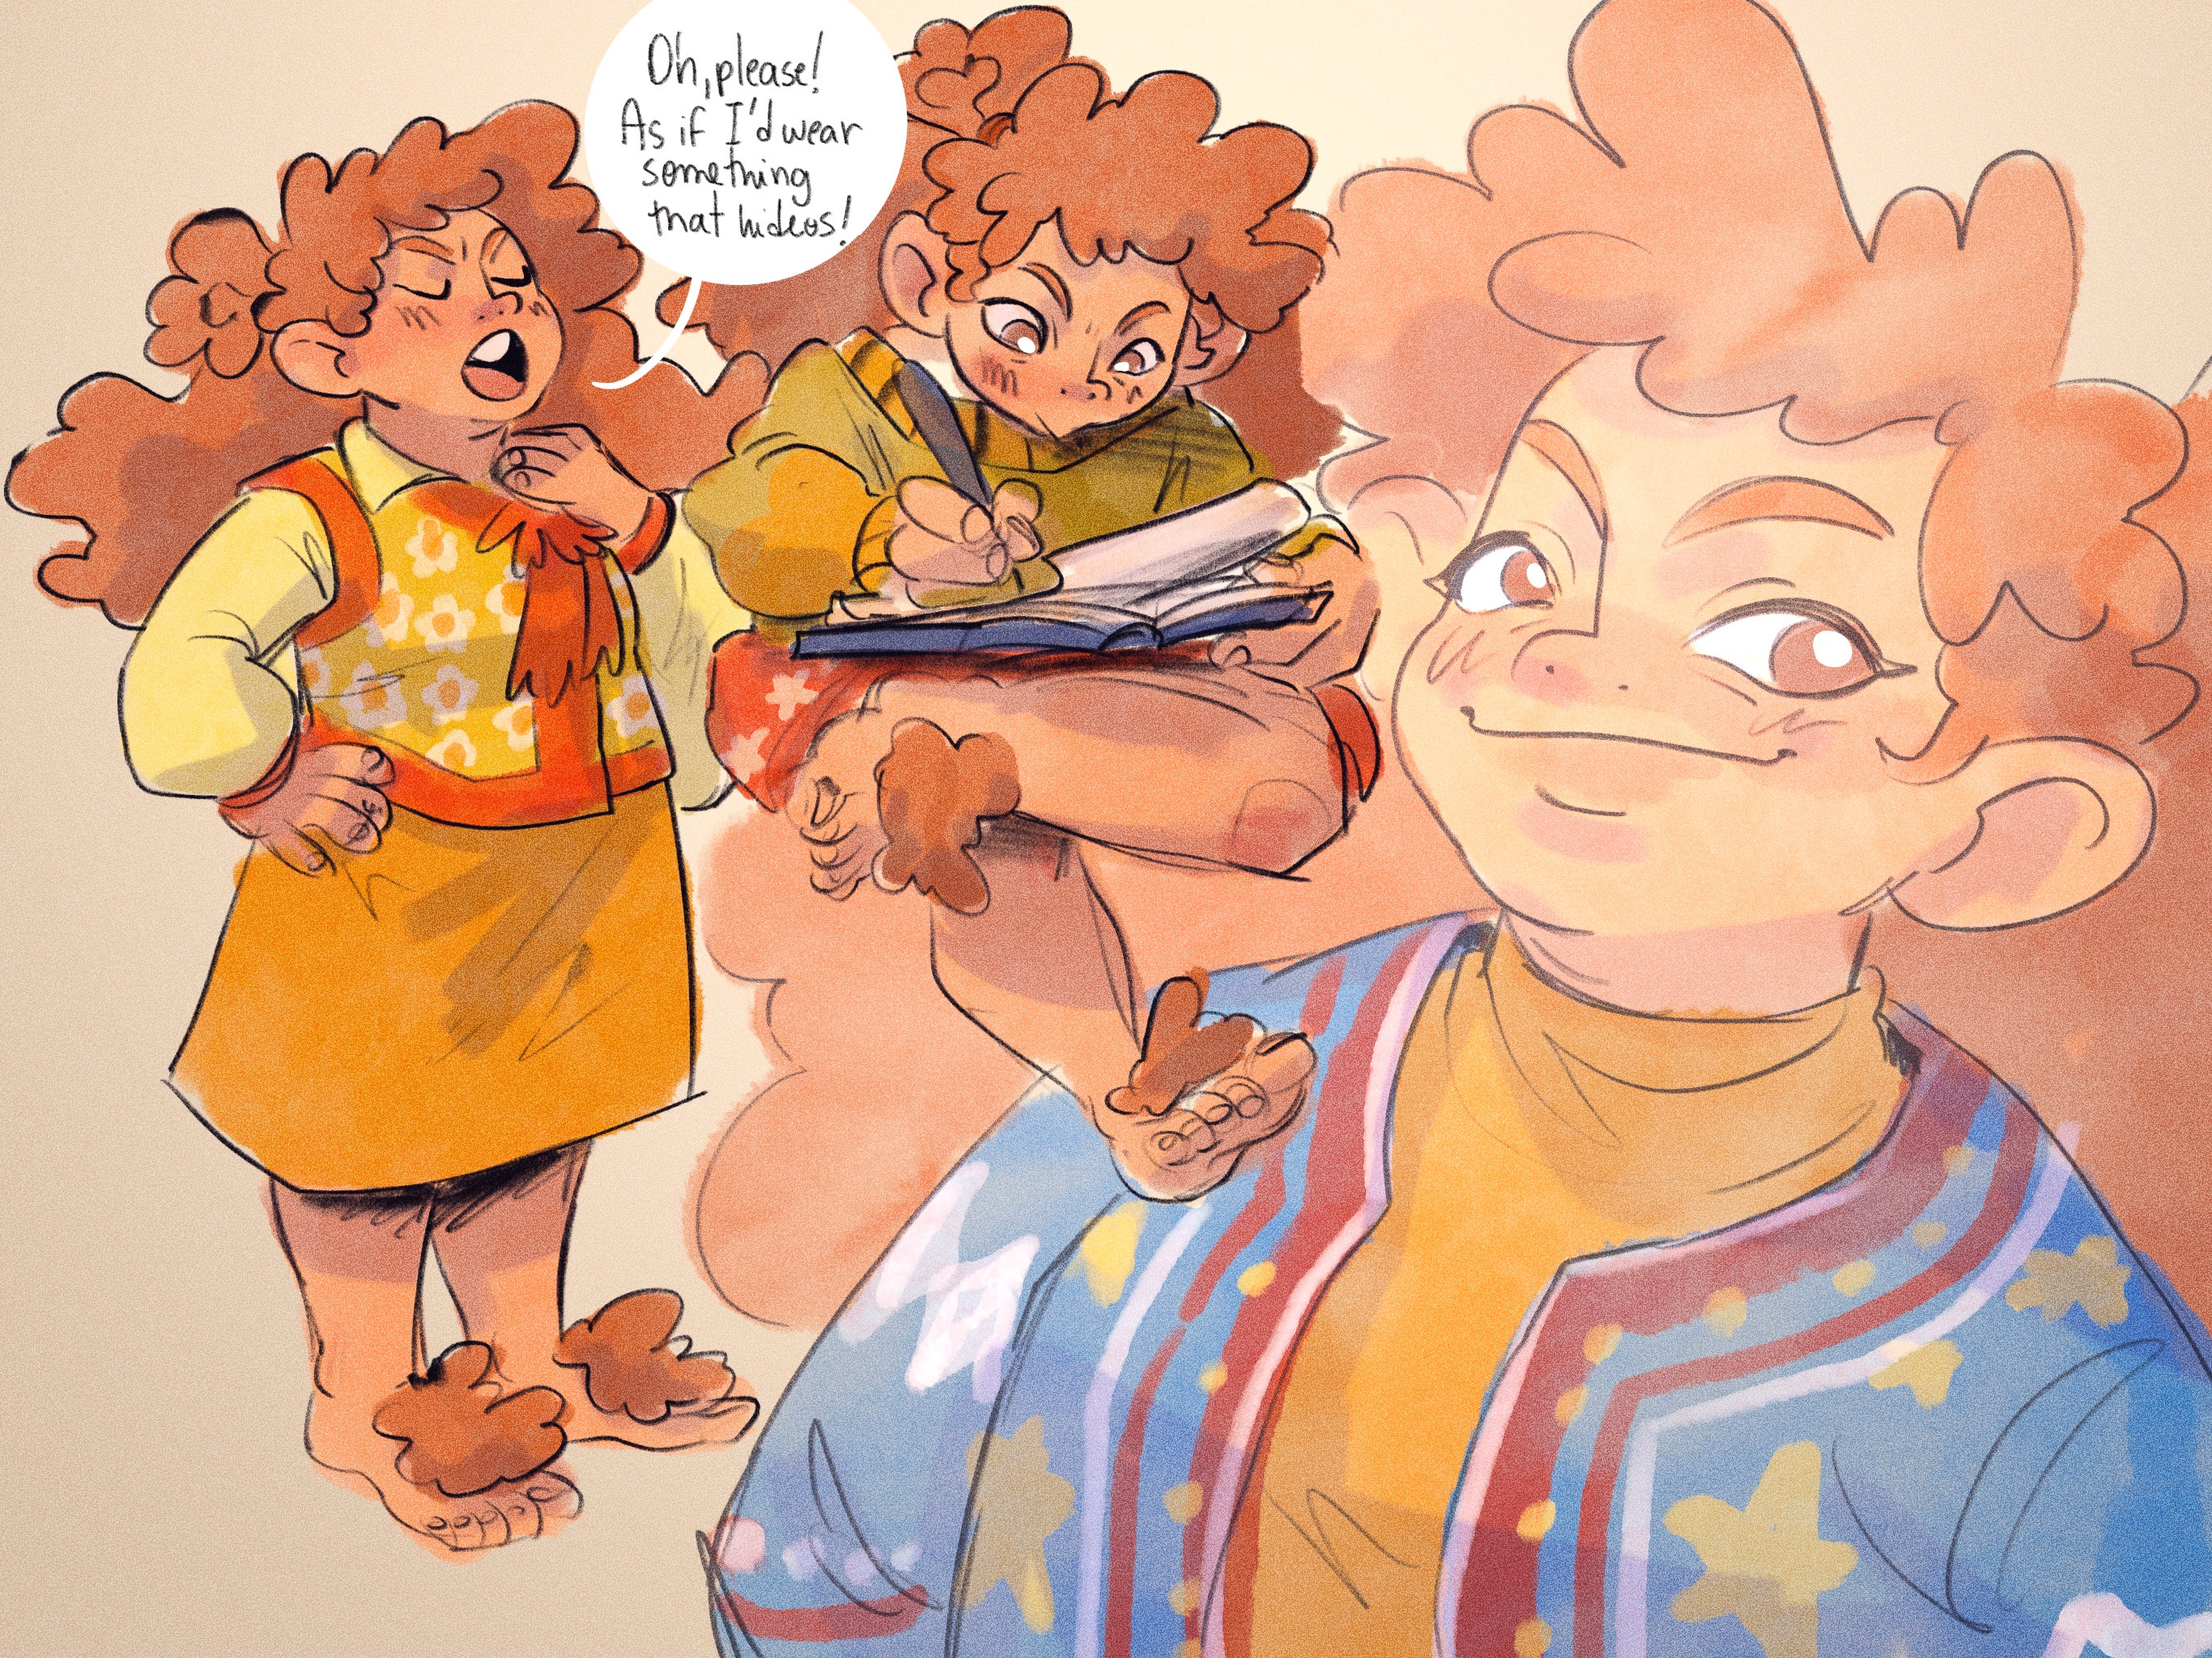 Petunia is a fashion designer hobbit, my inspiration for her was "what would hobbit fashion look like if it was inspired by the 70s?" She's a very "modern" hobbit to makes her own clothes 